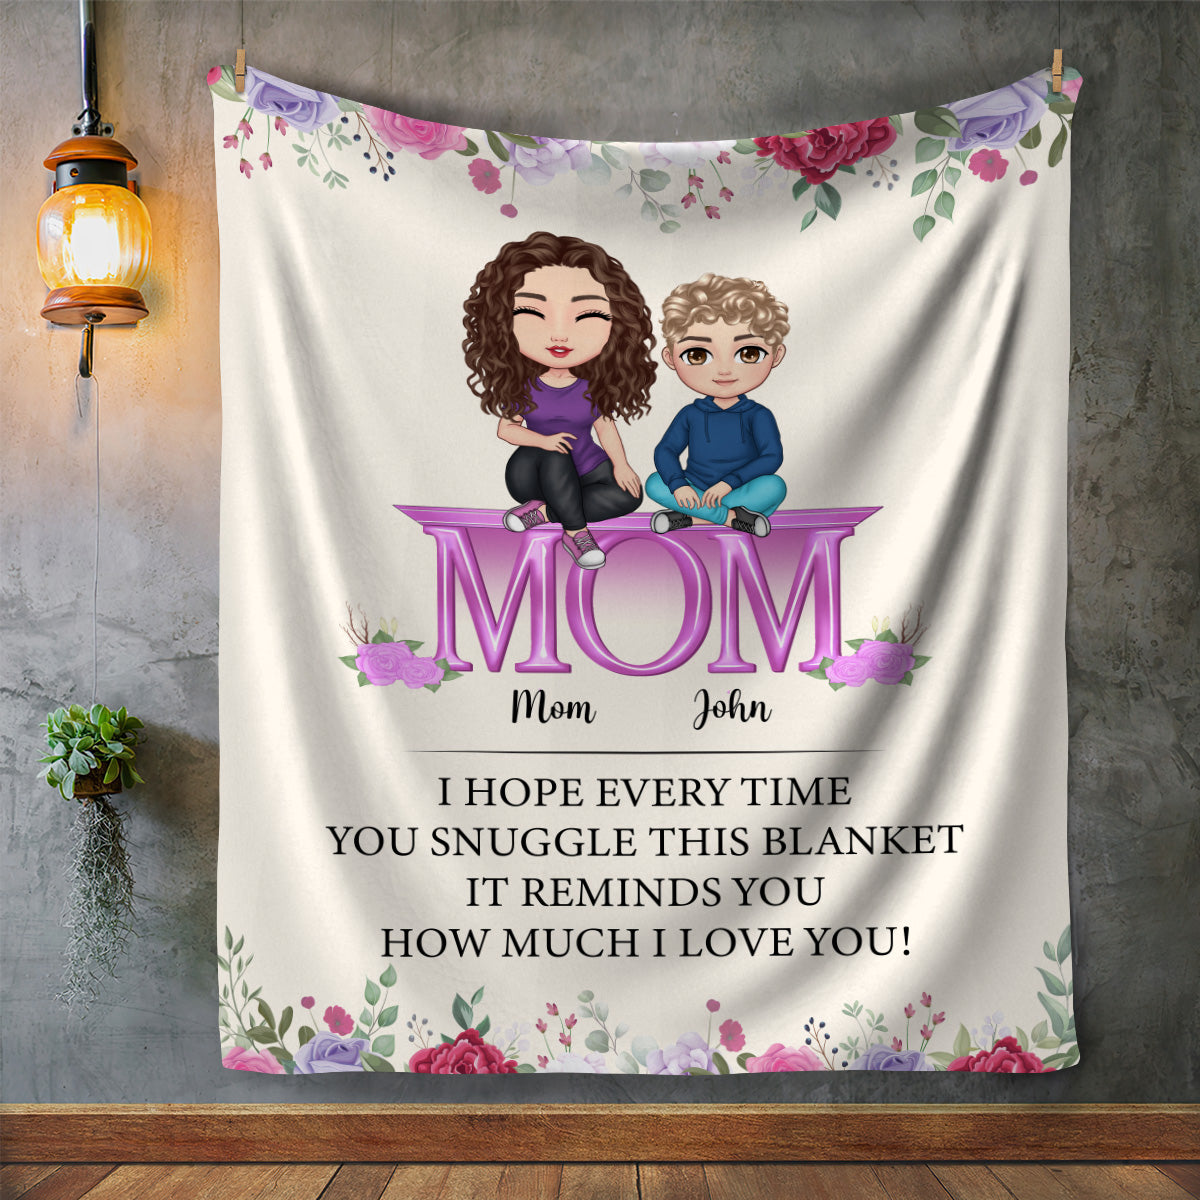 It Reminds You How Much I Love You- Personalized Blanket for Mom